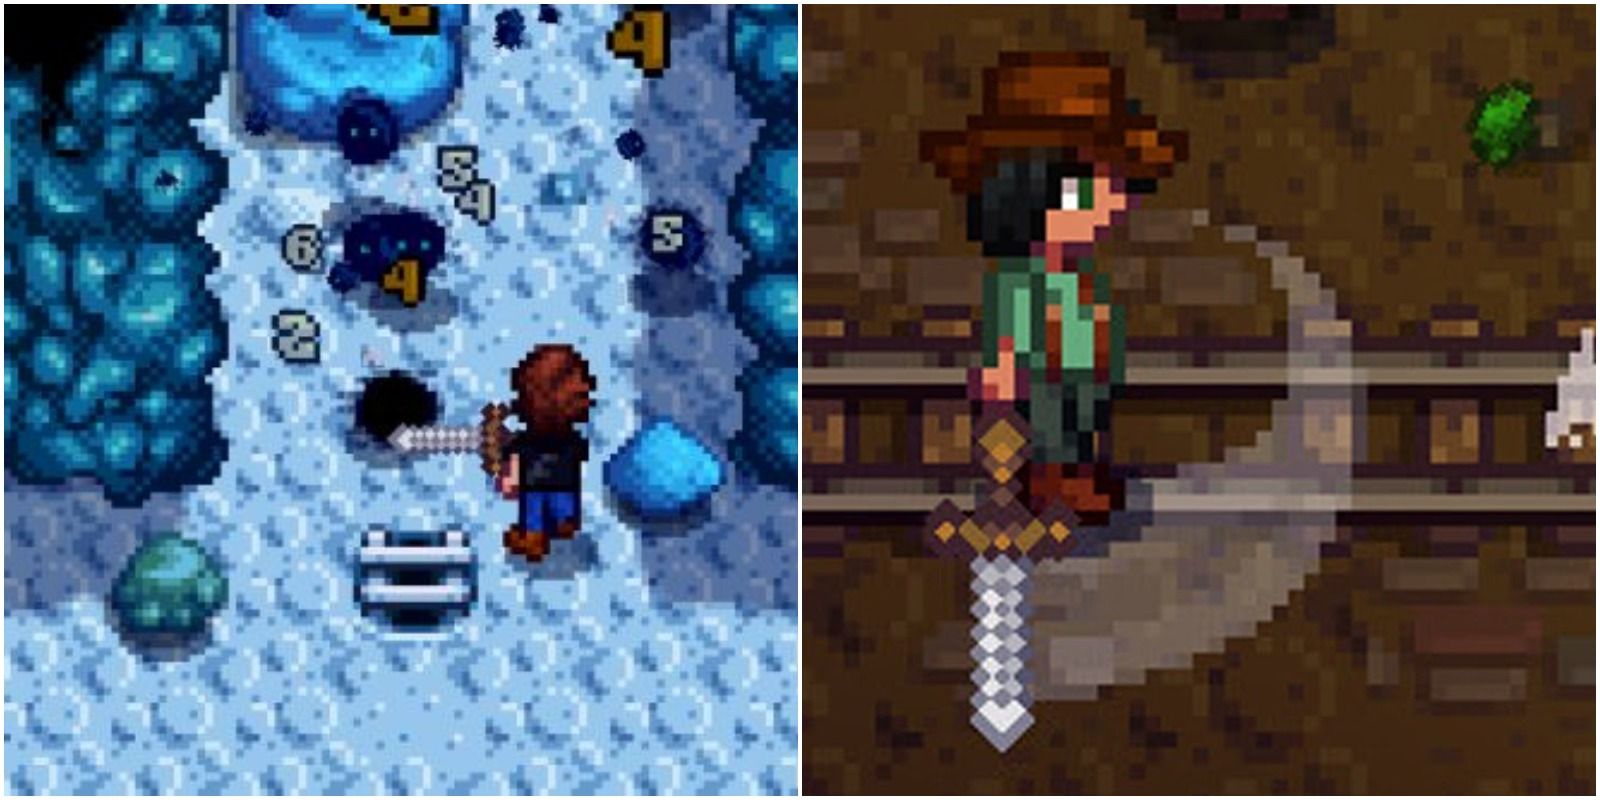 stardew valley weapon stats guide player fighting slimes